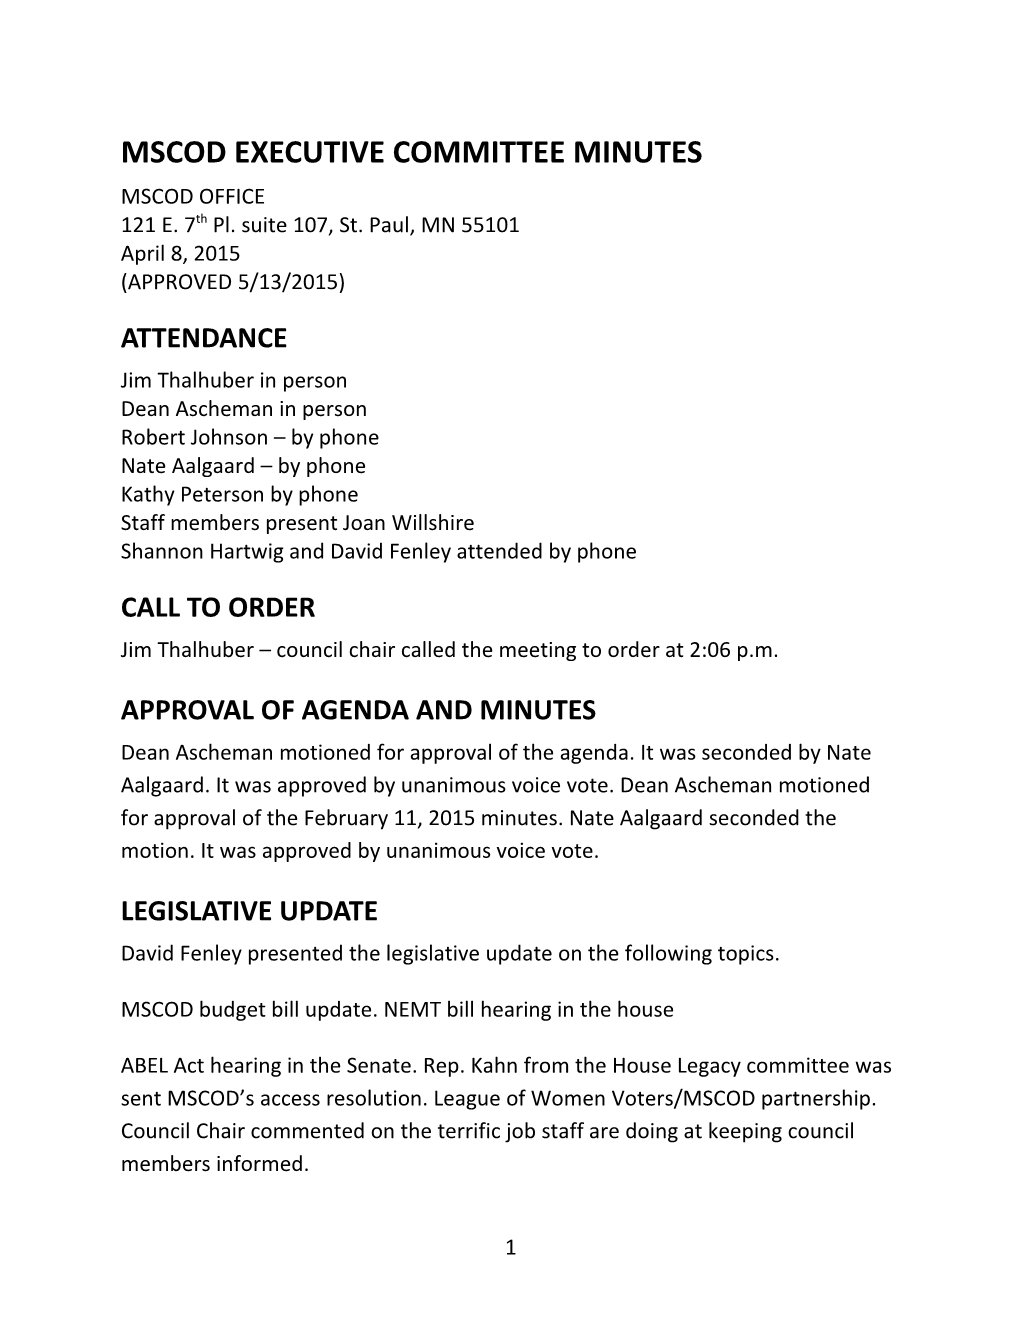 MSCOD Executive Committee Meeting Minutes, 04/08/2015